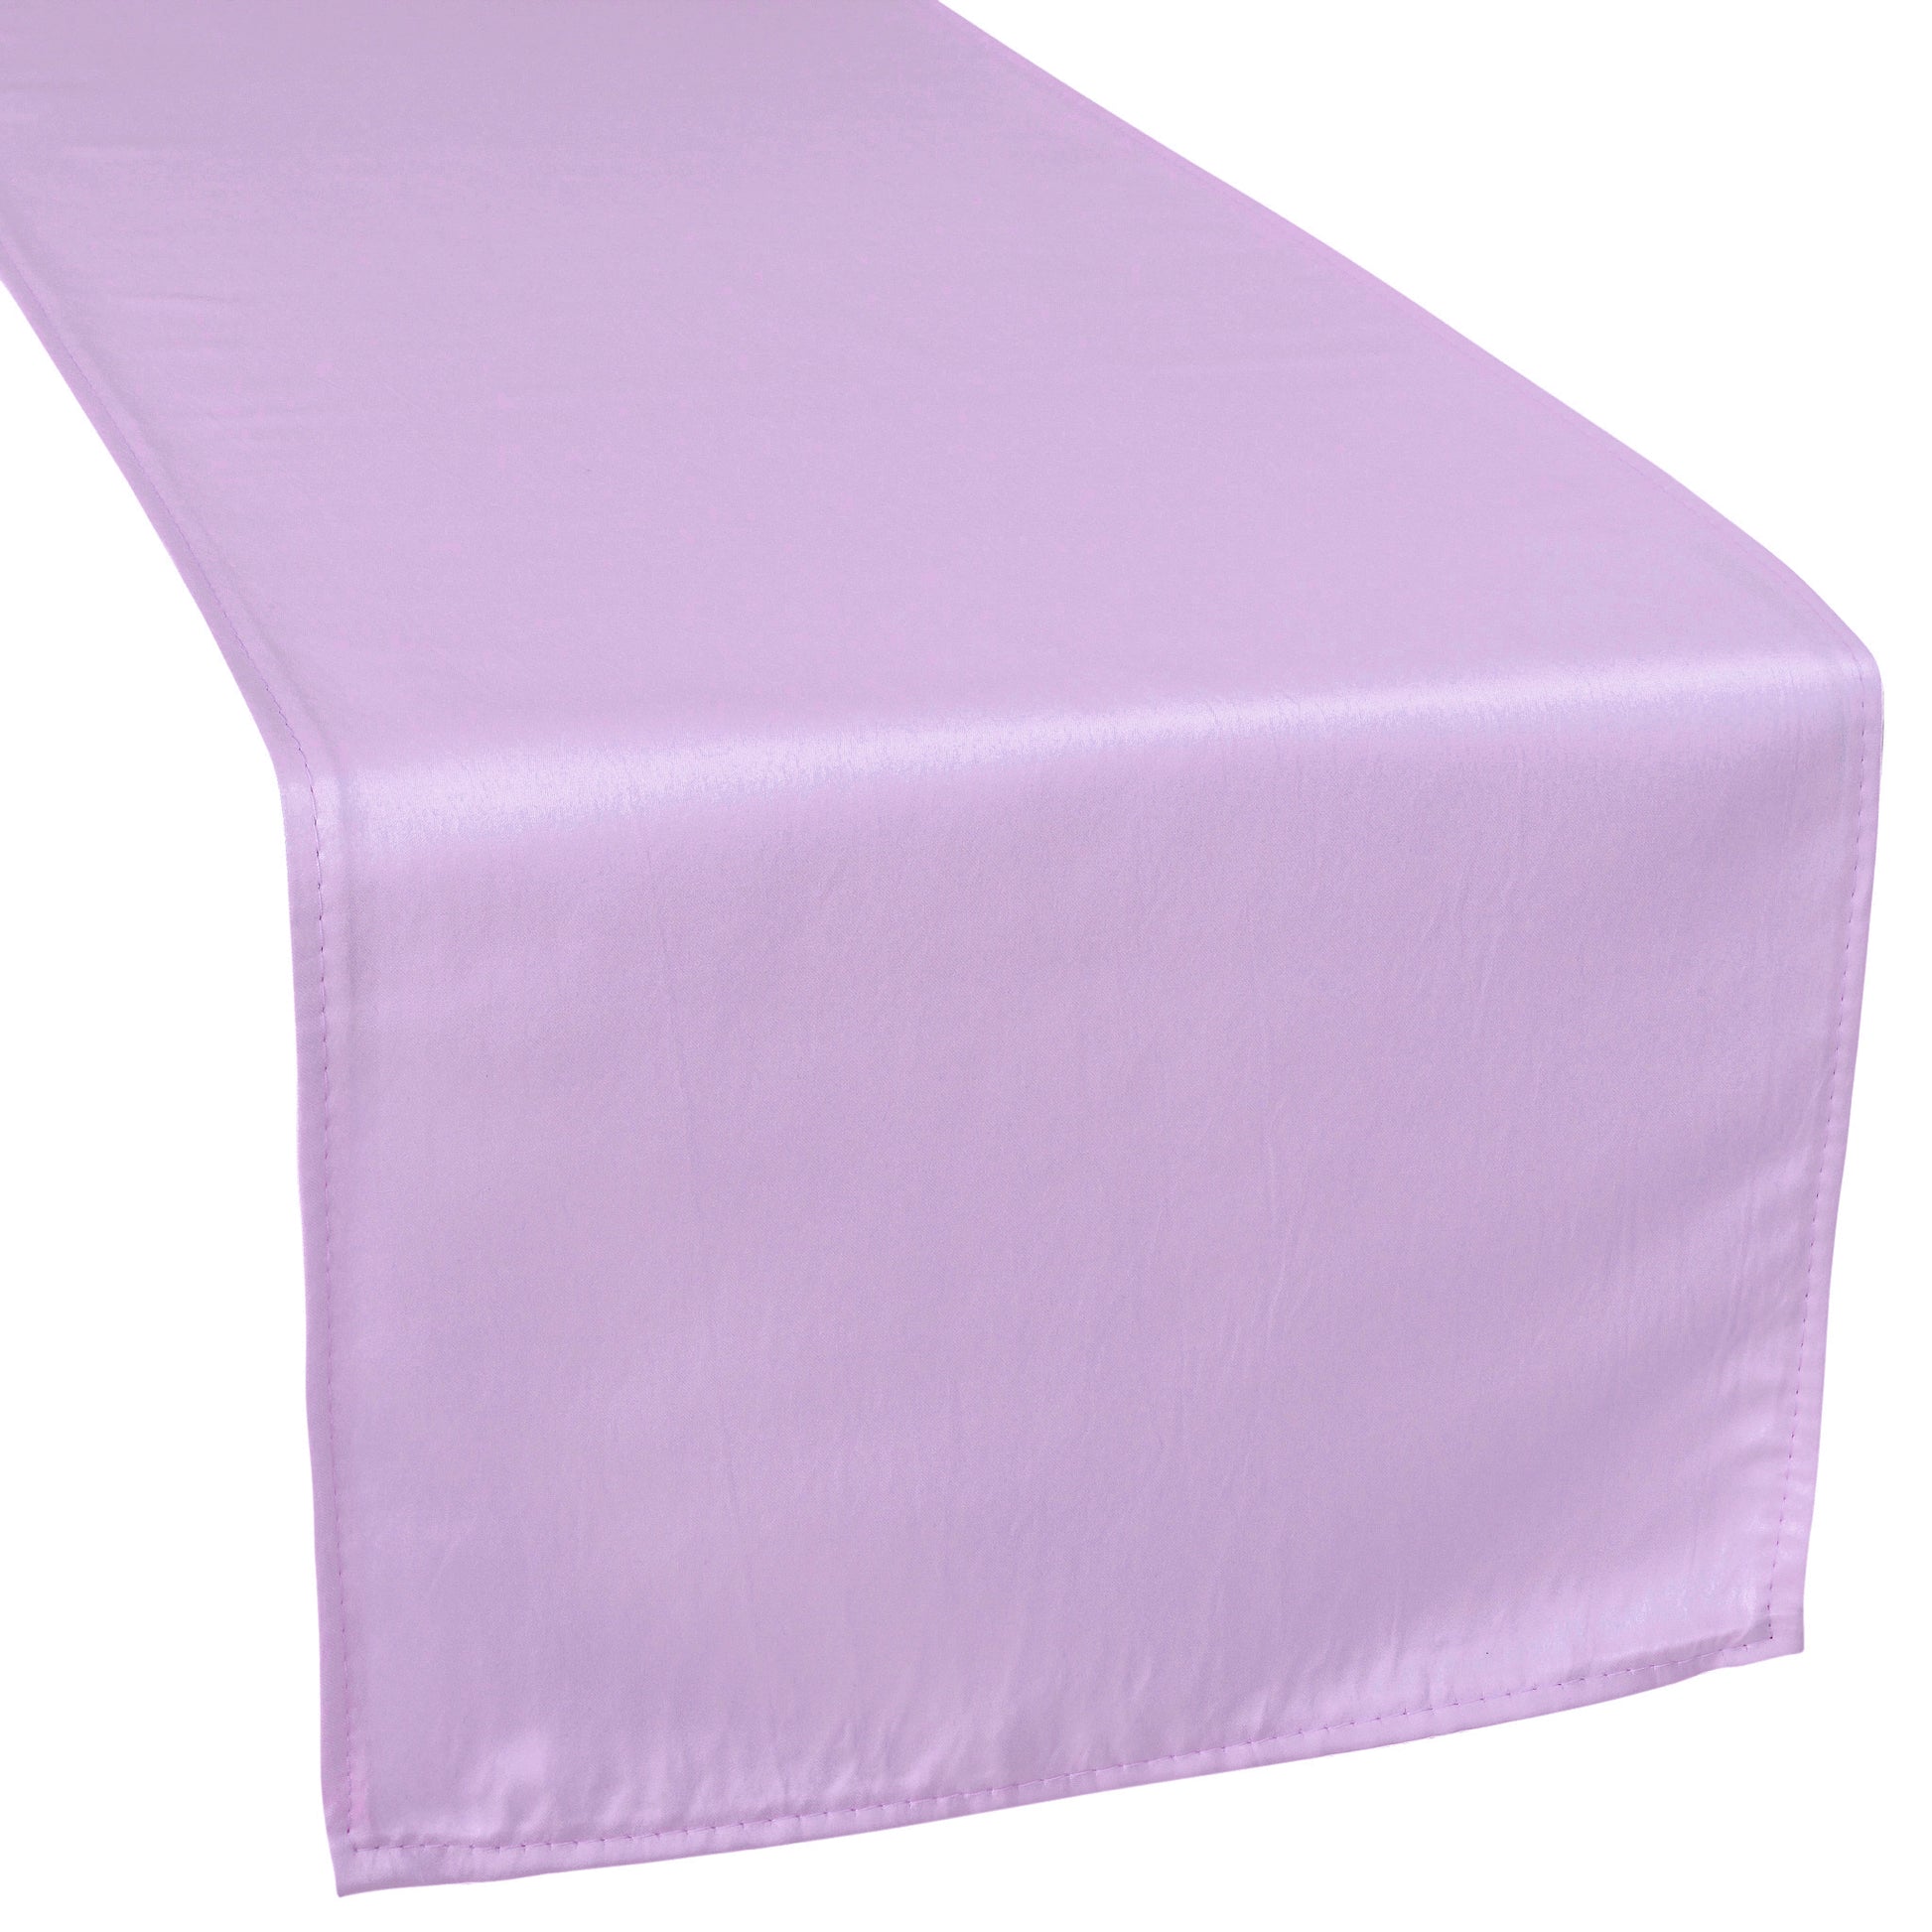 Lamour Satin Table Runner - Victorian Lilac/Wisteria